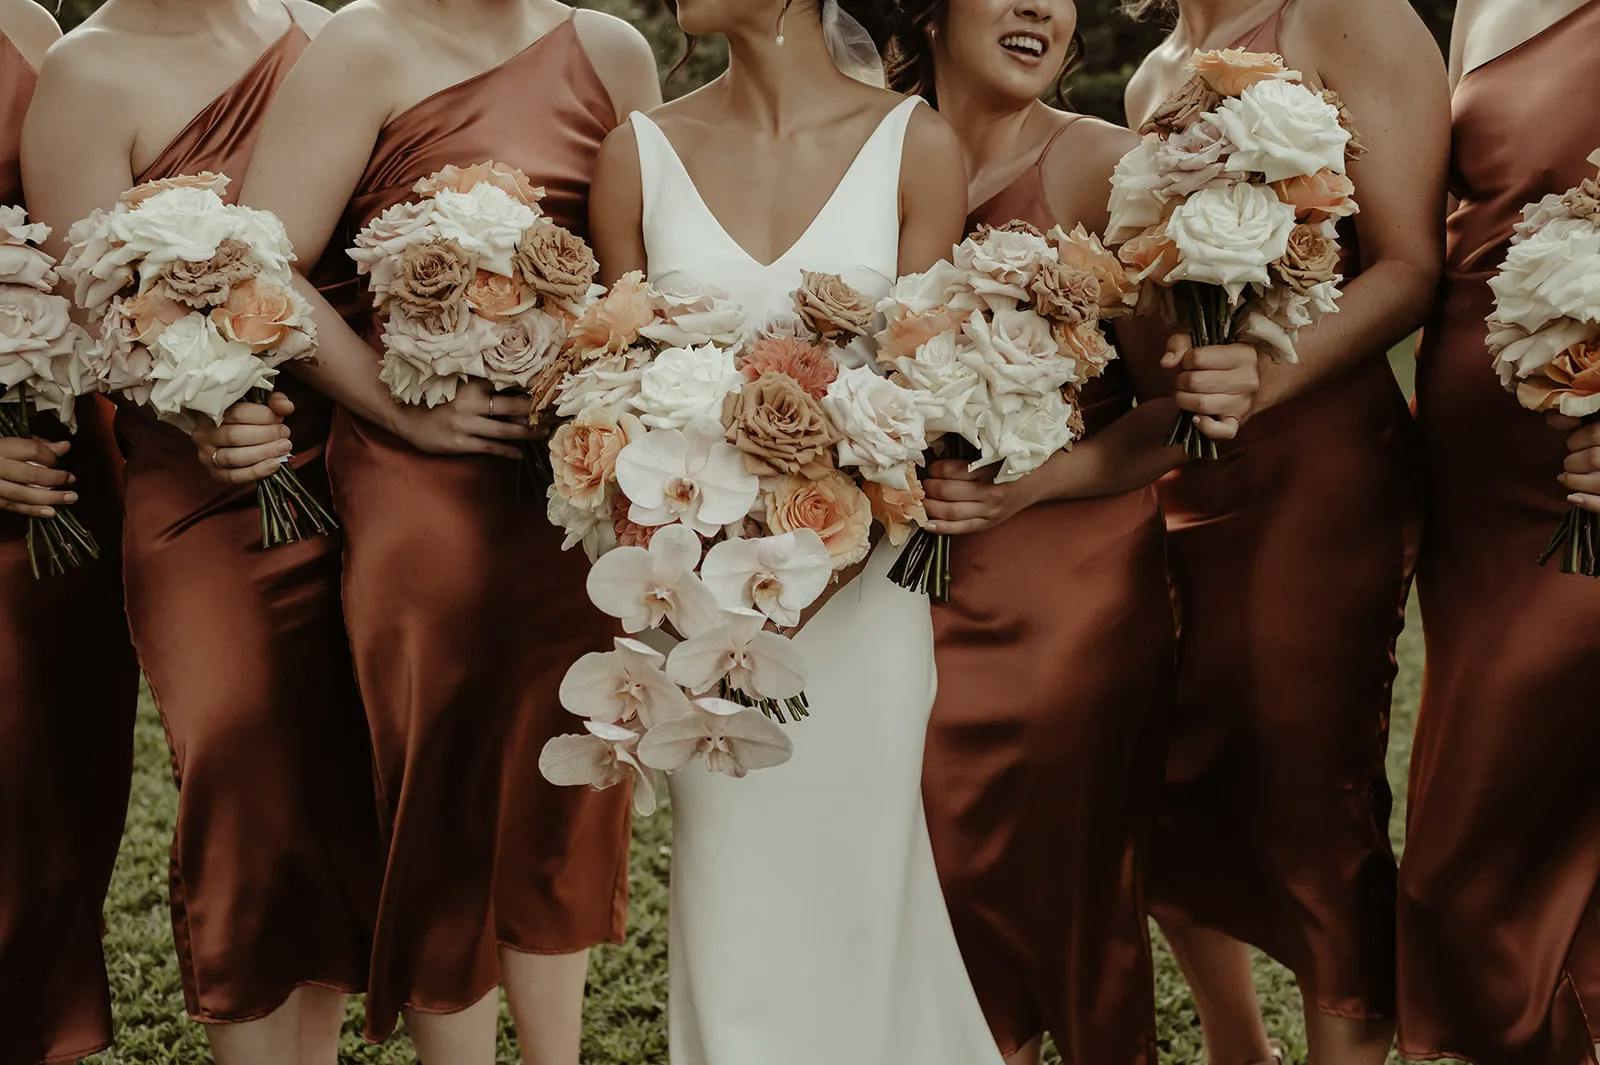 A group of bridesmaids in matching silky bronze dresses stands in a line, each holding a bouquet of white and peach flowers. The bride in the center wears a white gown and holds a large bouquet of white and peach flowers, including orchids.